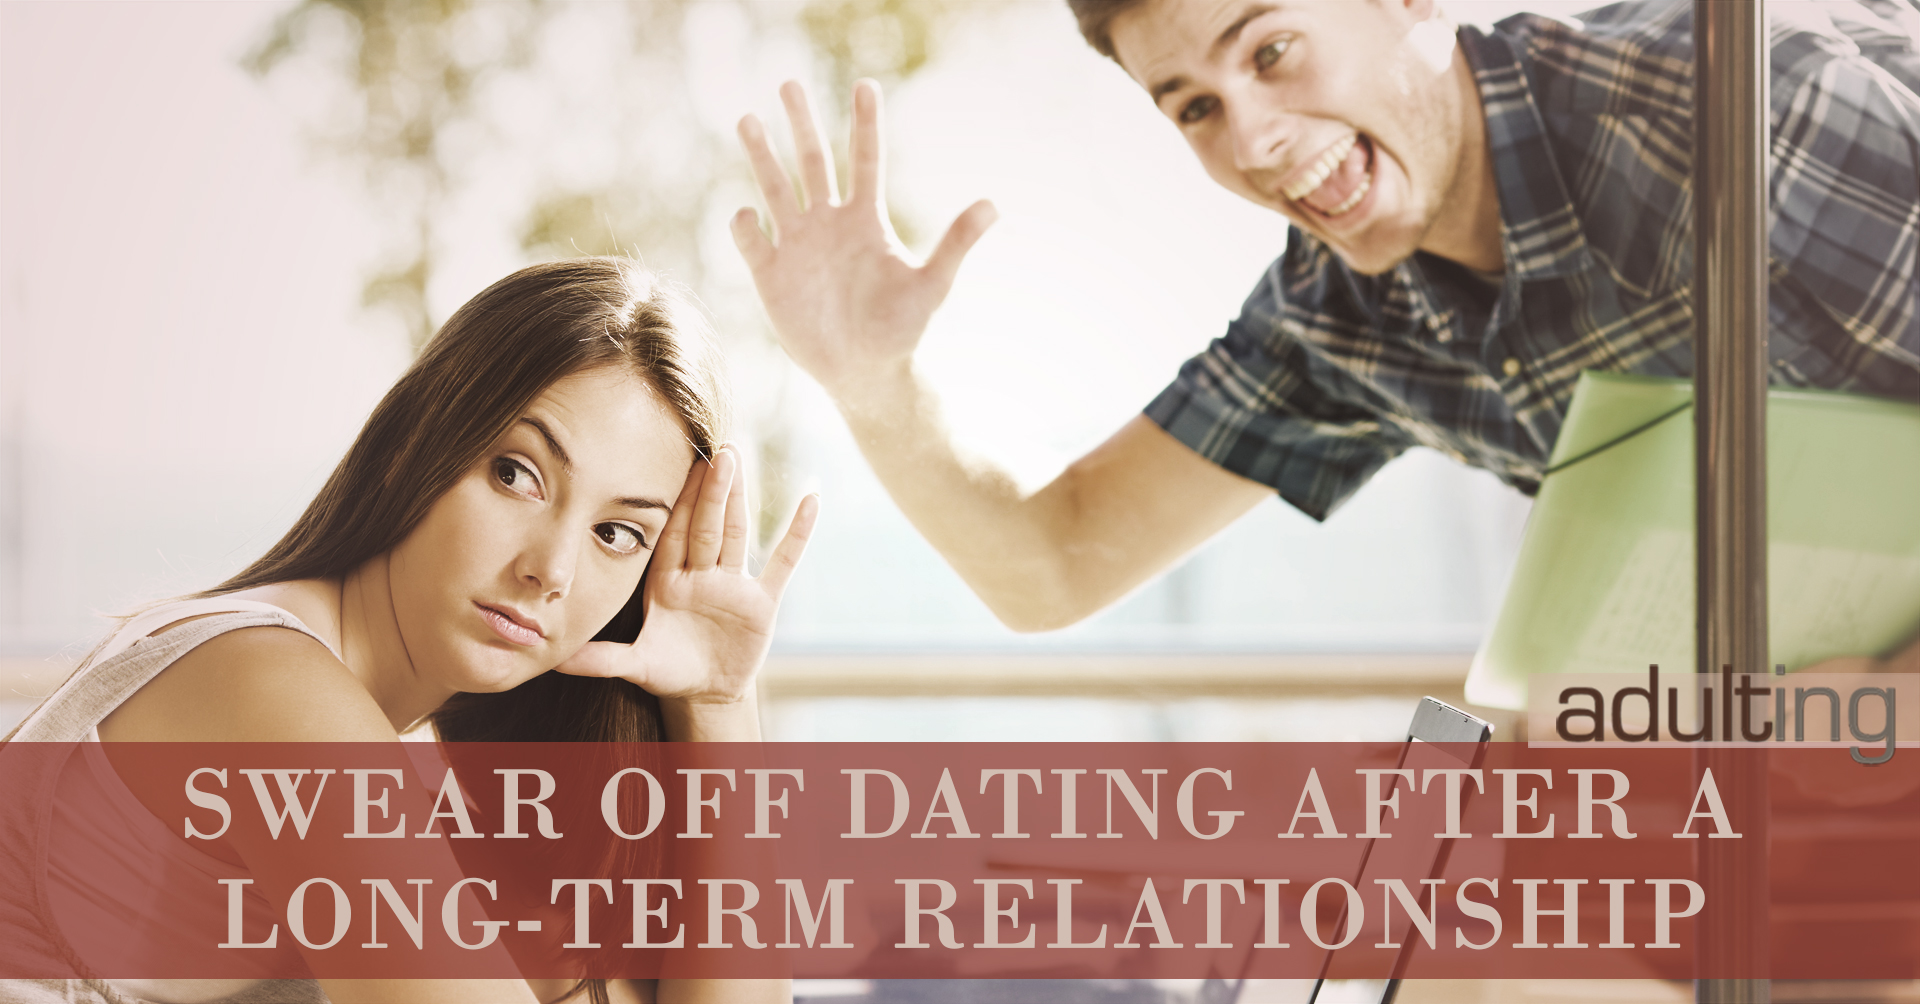 Swear off. Dating long term relationship. Dating after Divorce how long. Dating long distance after Divorce. Term relationship